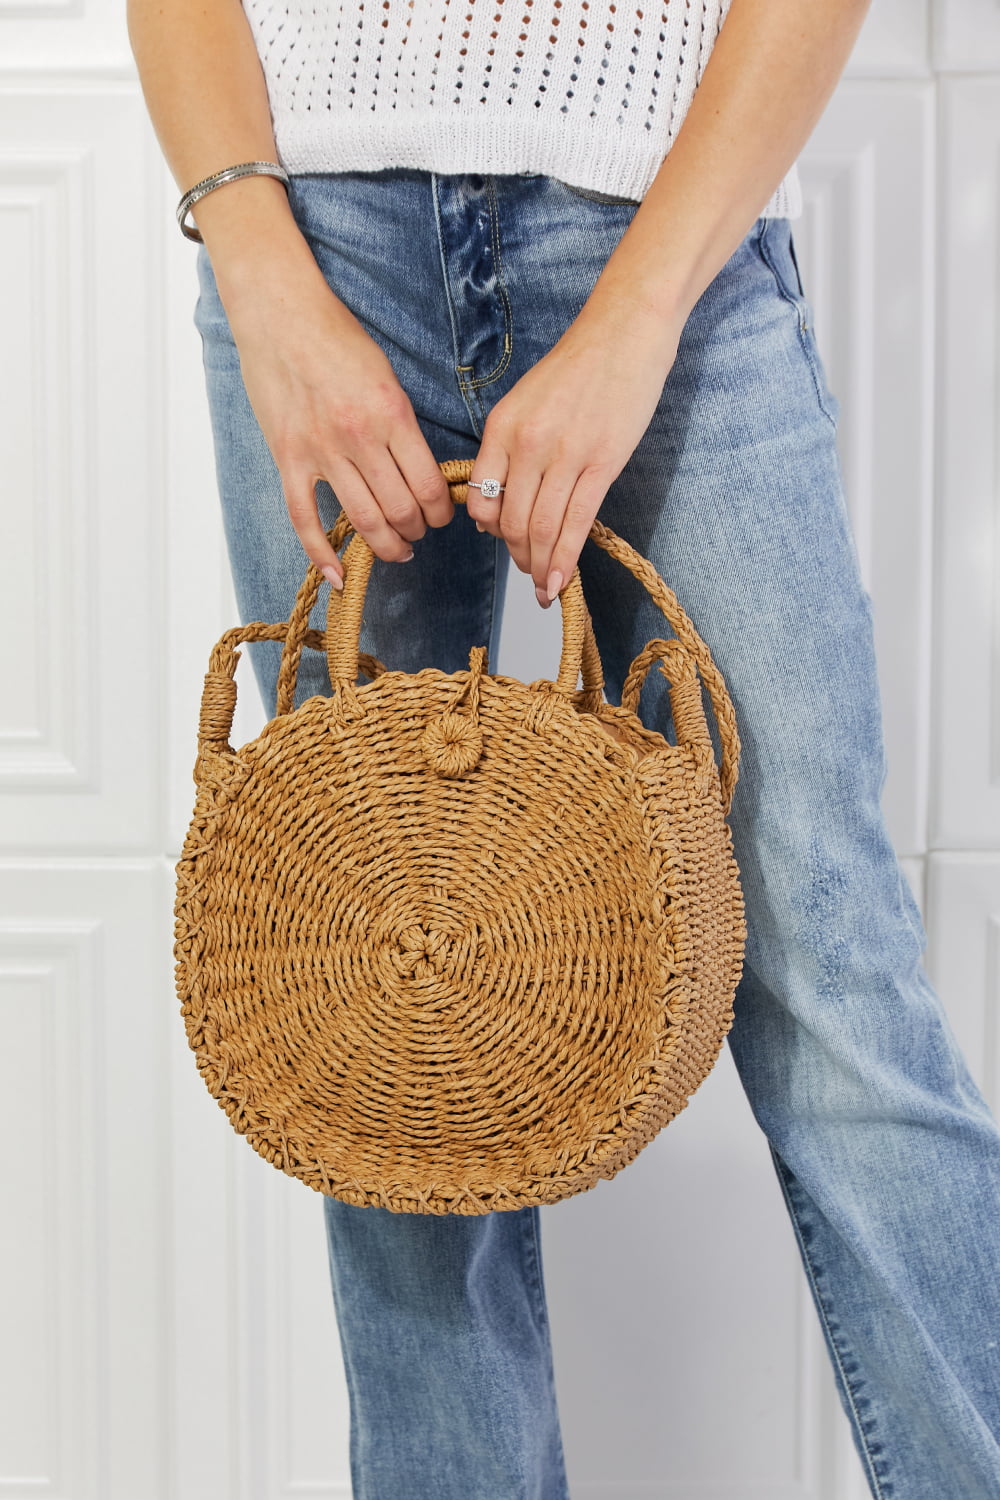 Justin Taylor Feeling Cute Rounded Rattan Handbag in Camel  Sunset and Swim   